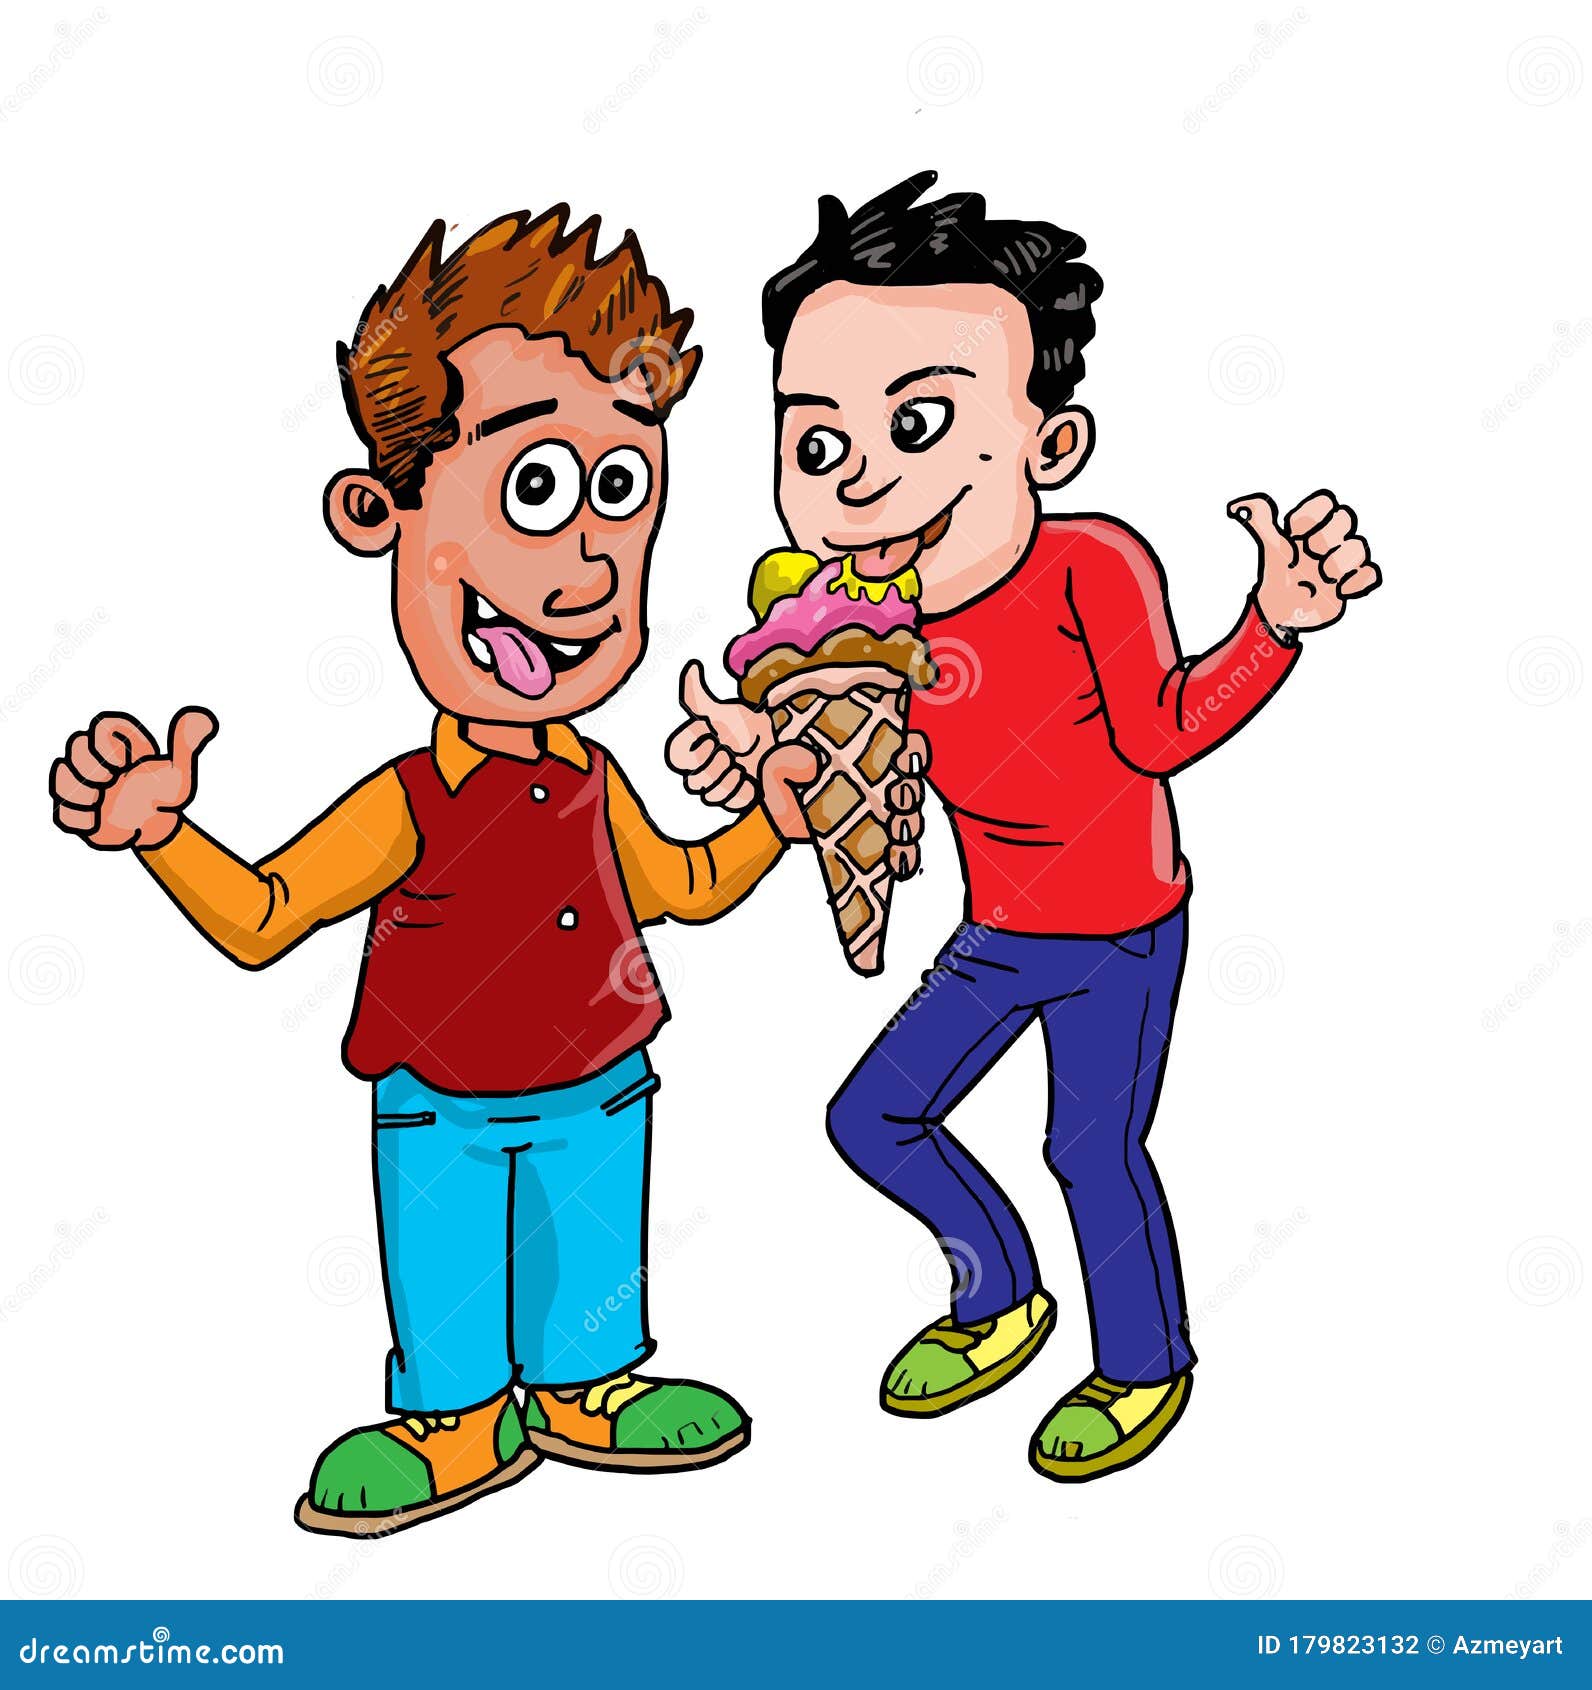 Download Cartoon Two Boys With An Ice Cream Stock Vector - Illustration of happy, eating: 179823132